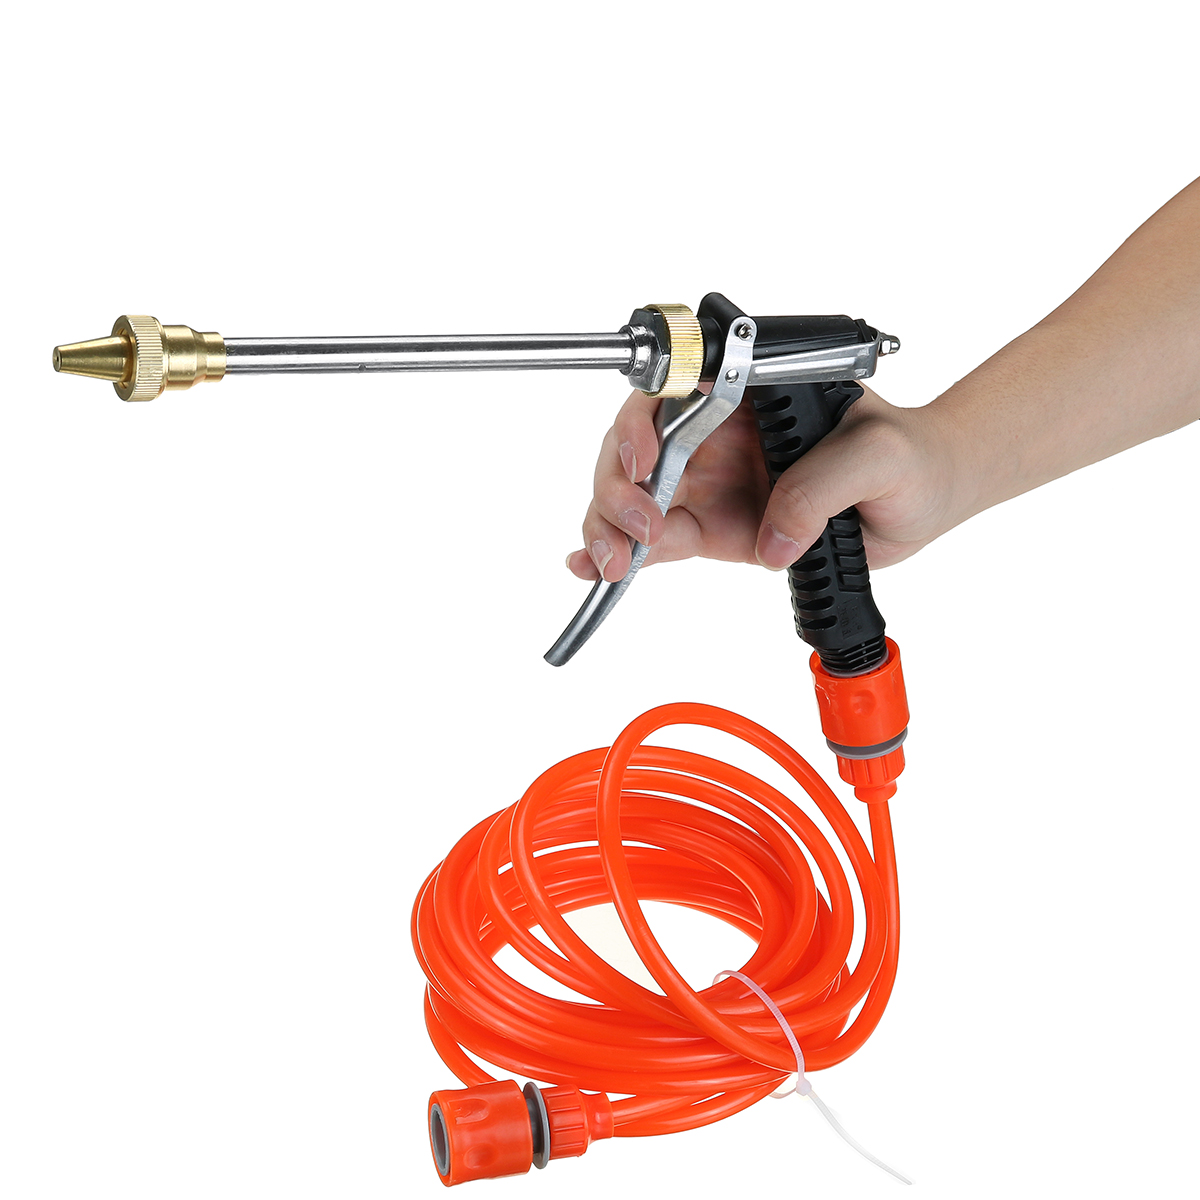 12V-120W-250PSI-Household-Car-Wash-Pump-Portable-High-Pressure-Electric-Washer-Spray-Tool-1817717-8